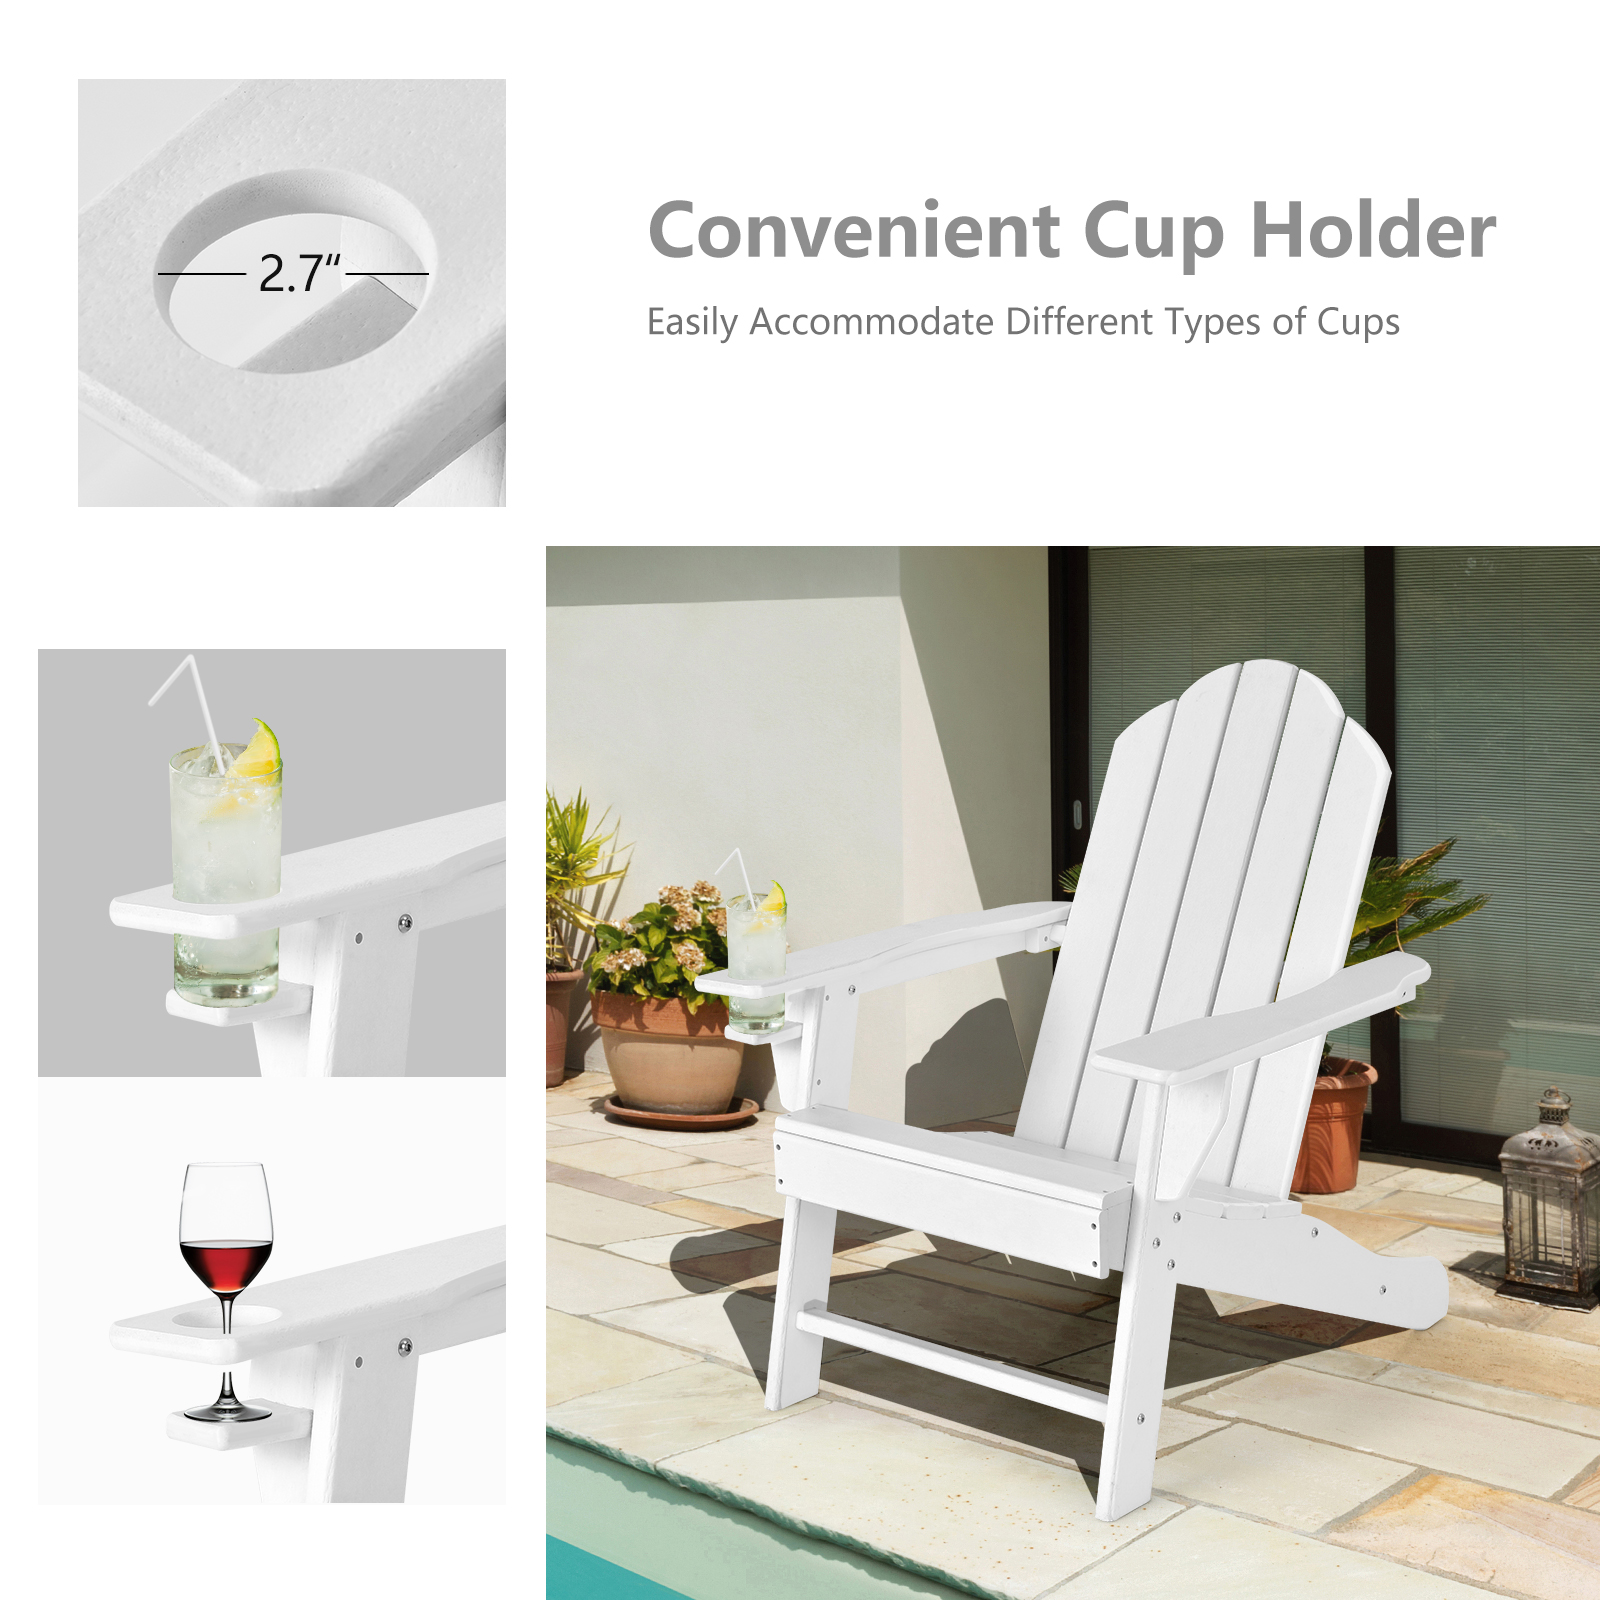 Patiojoy Patio 3PCS Adirondack Chair Side Table Set Outdoor Chair Set with End Table Weather Resistant Cup Holder for Backyard Garden White - image 4 of 7